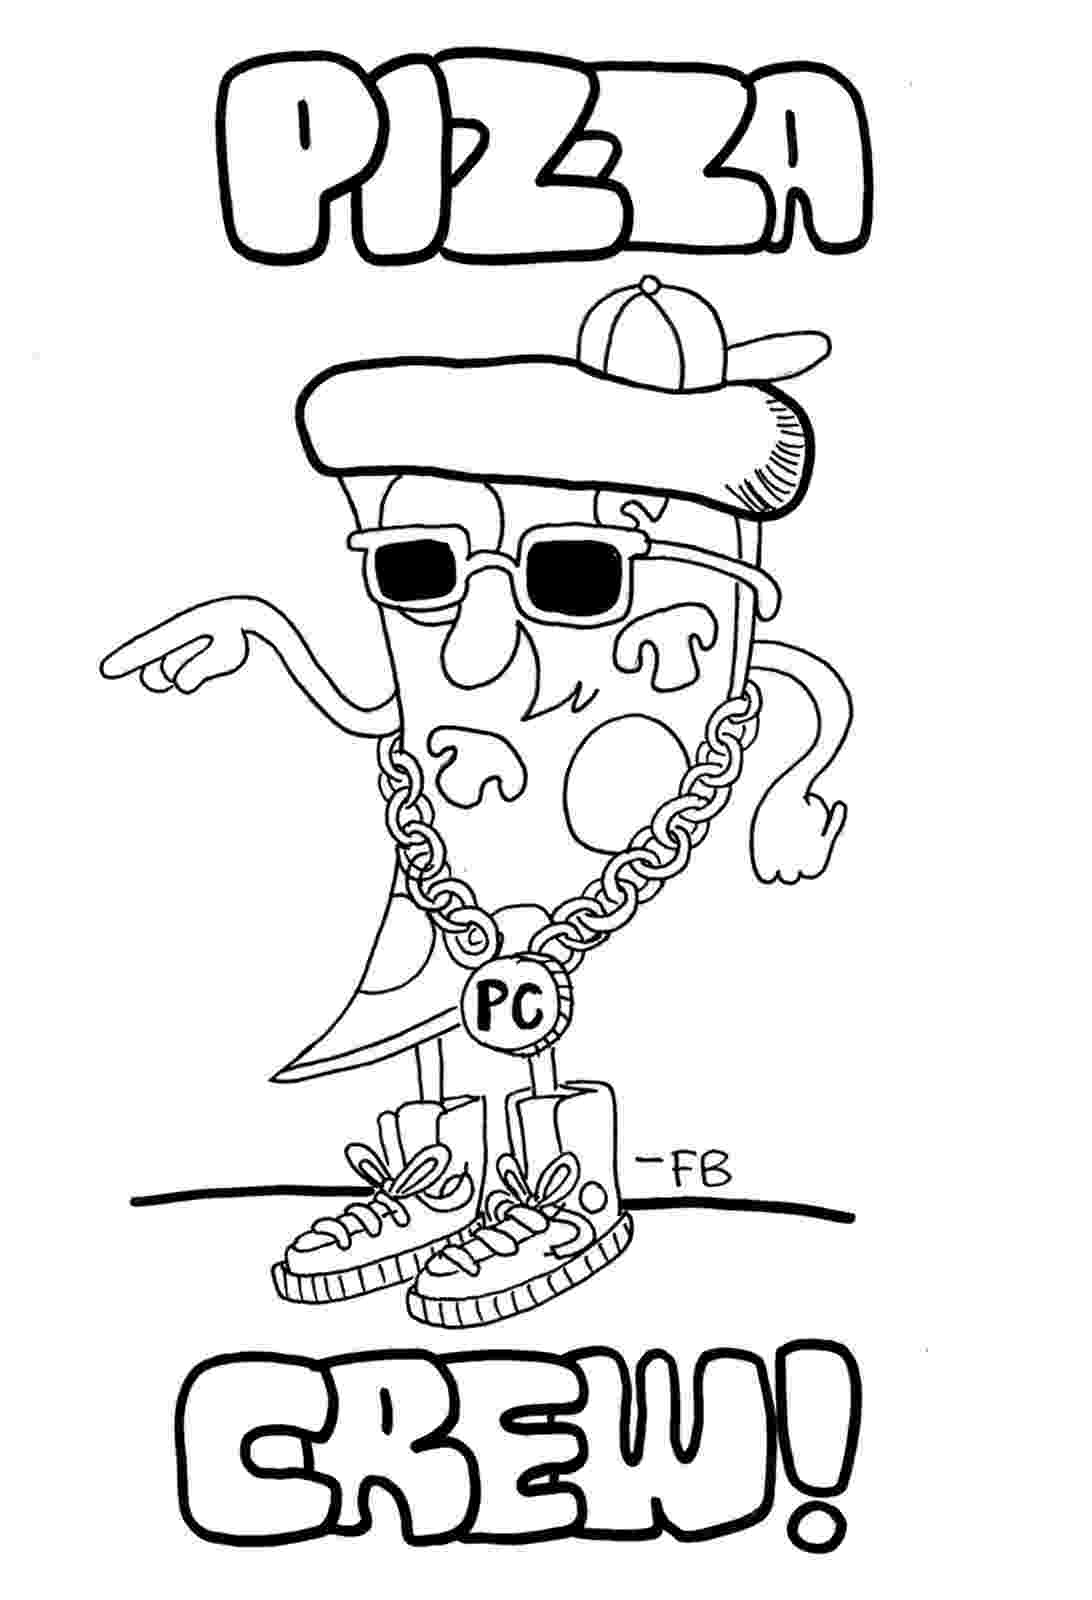 cool coloring pages for 9 year olds coloring pages 9 year old 01 cool coloring pages for pages year coloring olds 9 cool 